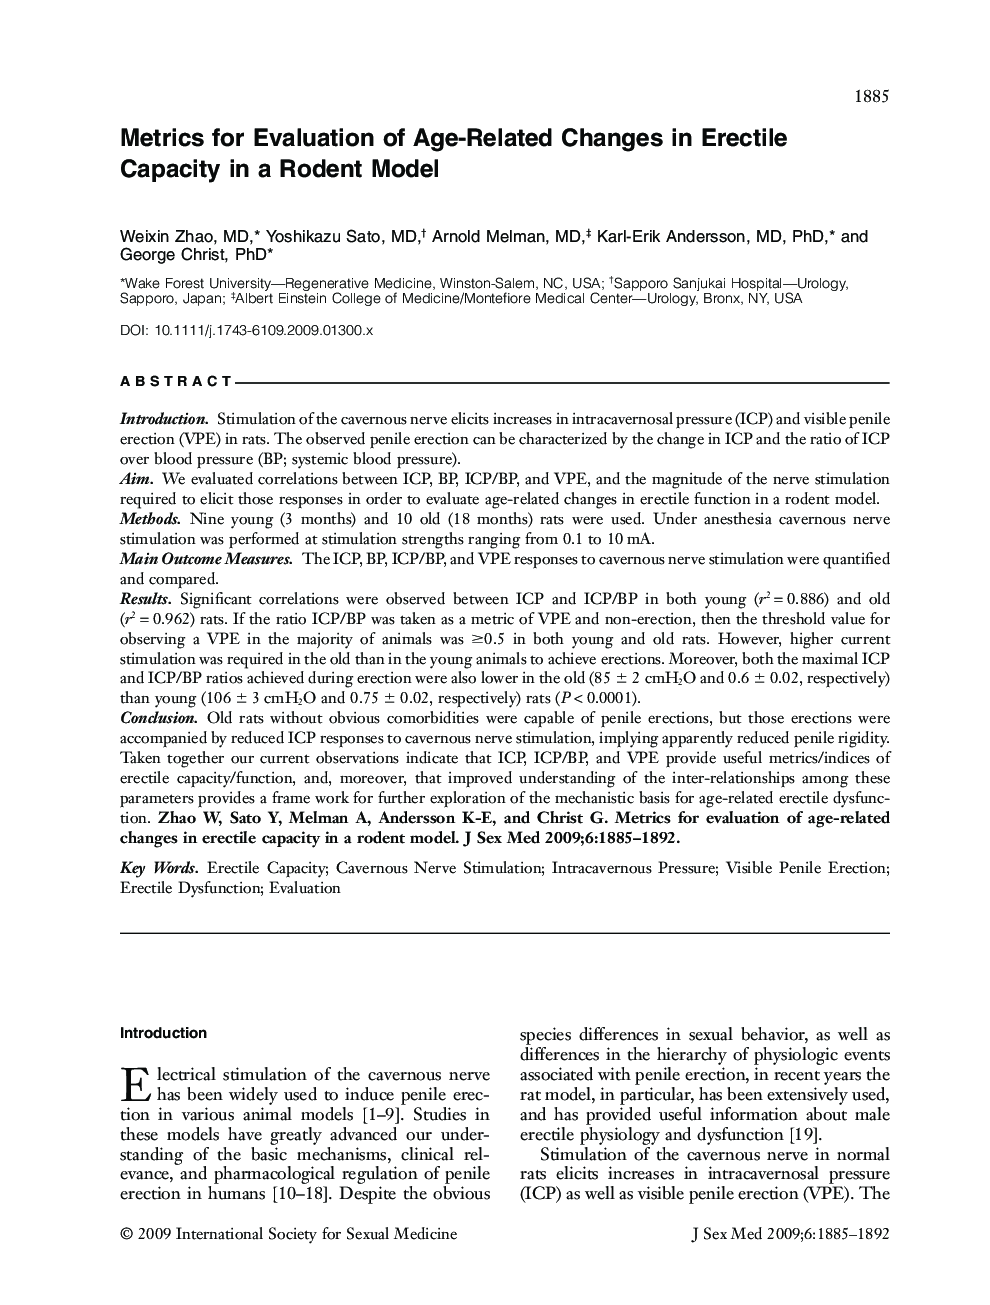 Metrics for Evaluation of Age-Related Changes in Erectile Capacity in a Rodent Model